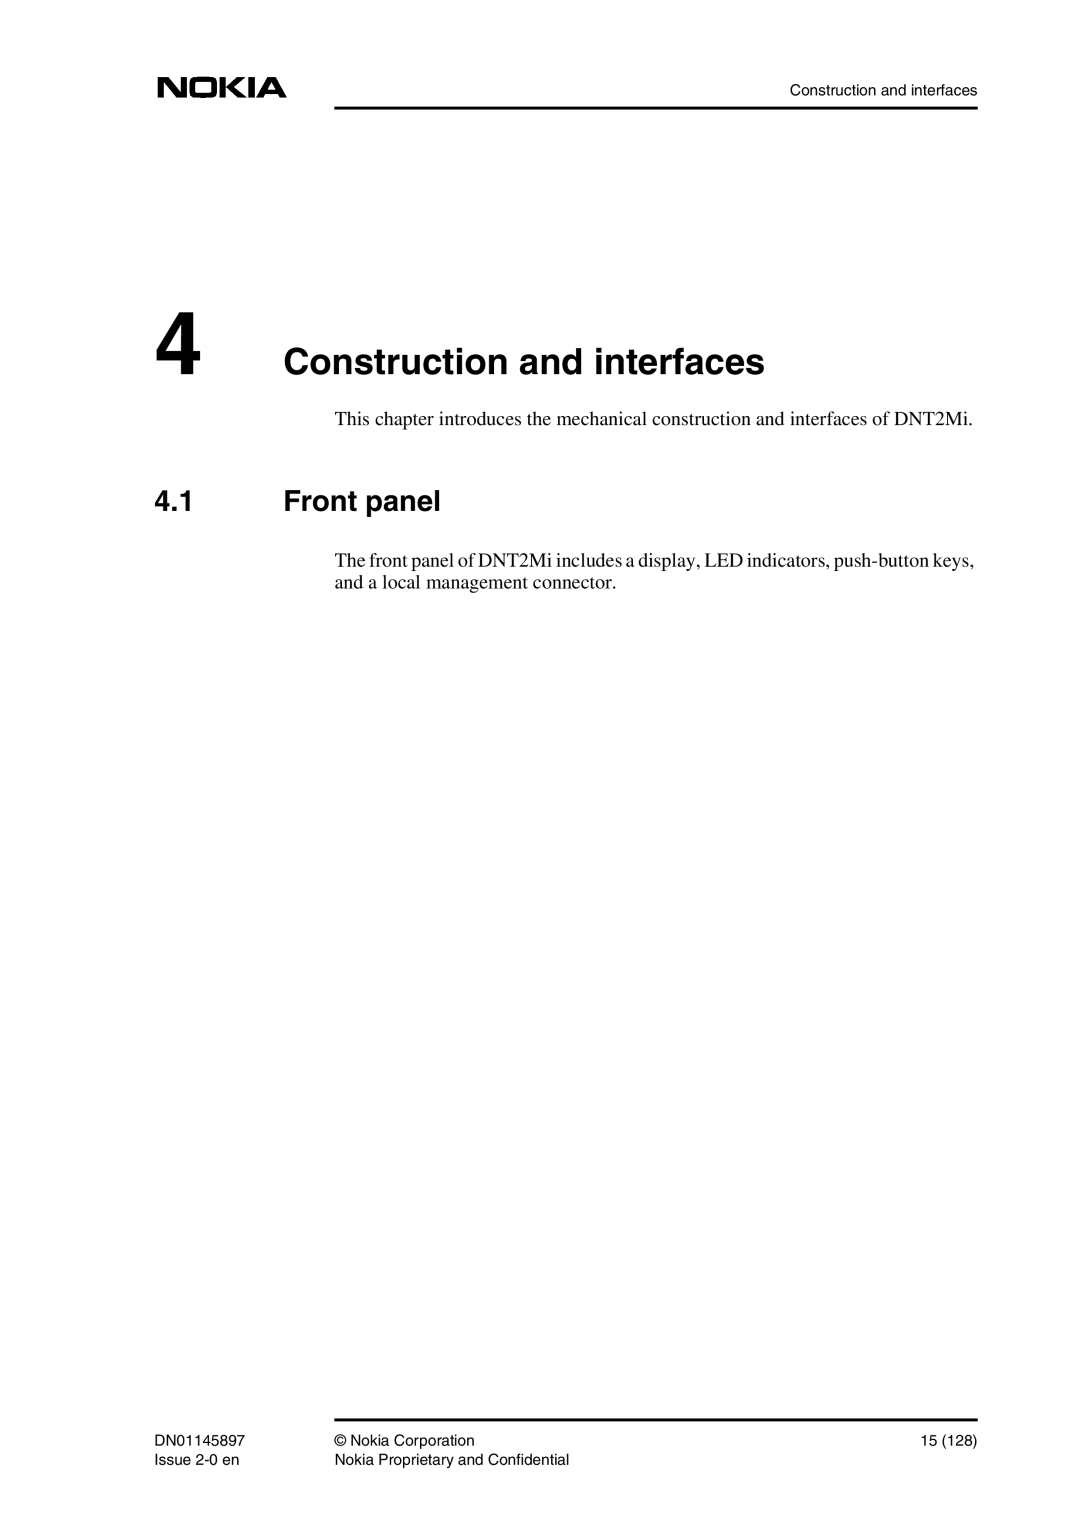 Nokia DNT2Mi sp/mp user manual Construction and interfaces, Front panel 